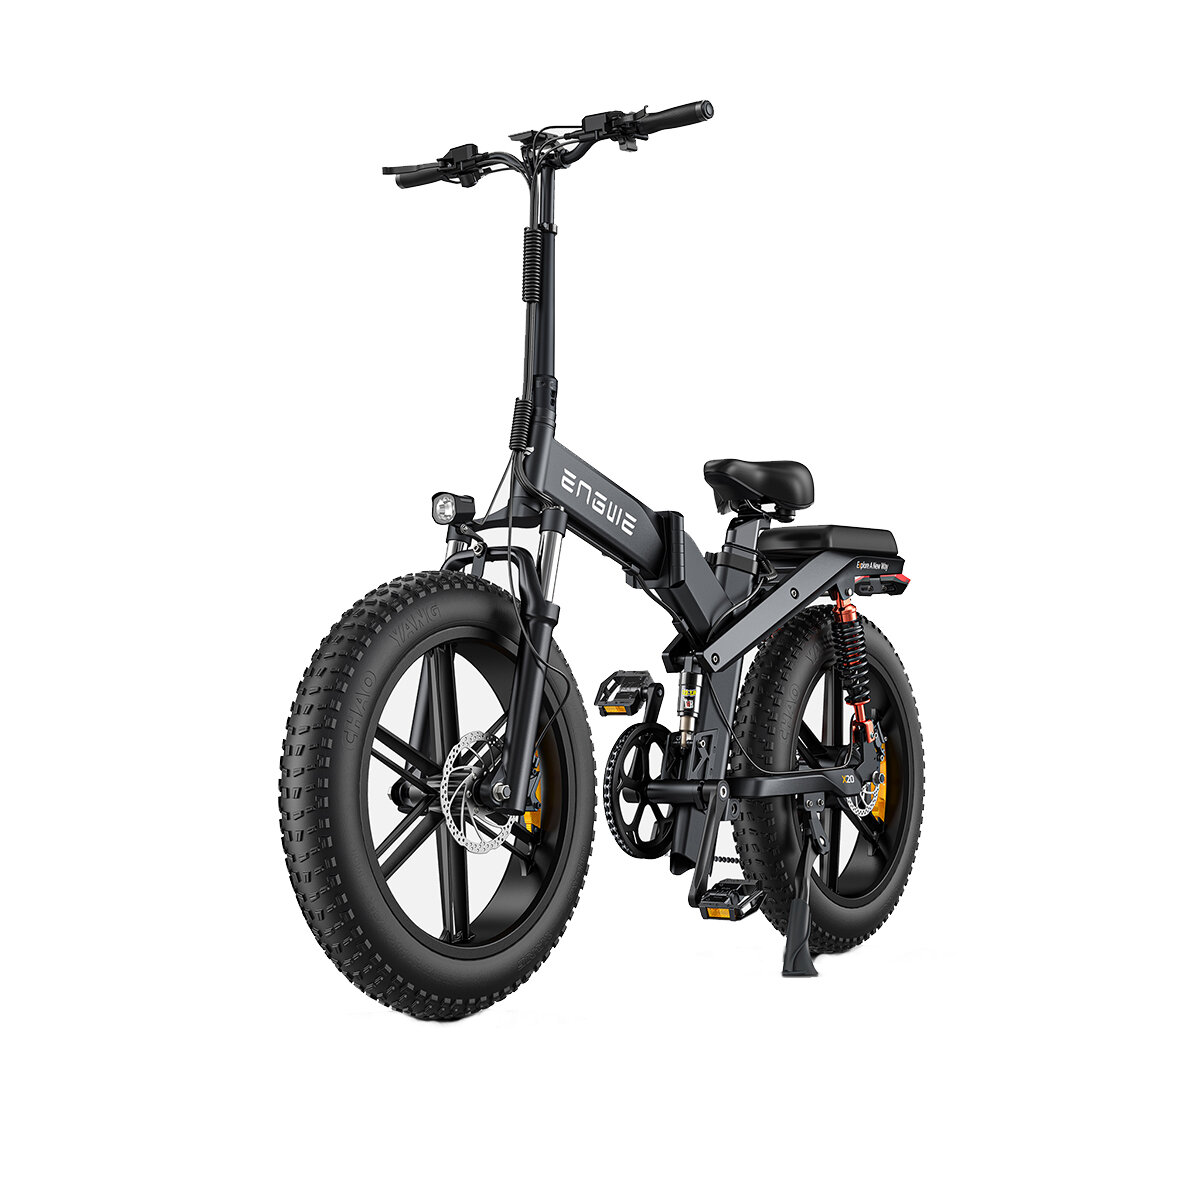 best price,engwe,x20,48v,14.4ah+7.8ah,750w,electric,bicycle,20inch,eu,coupon,price,discount